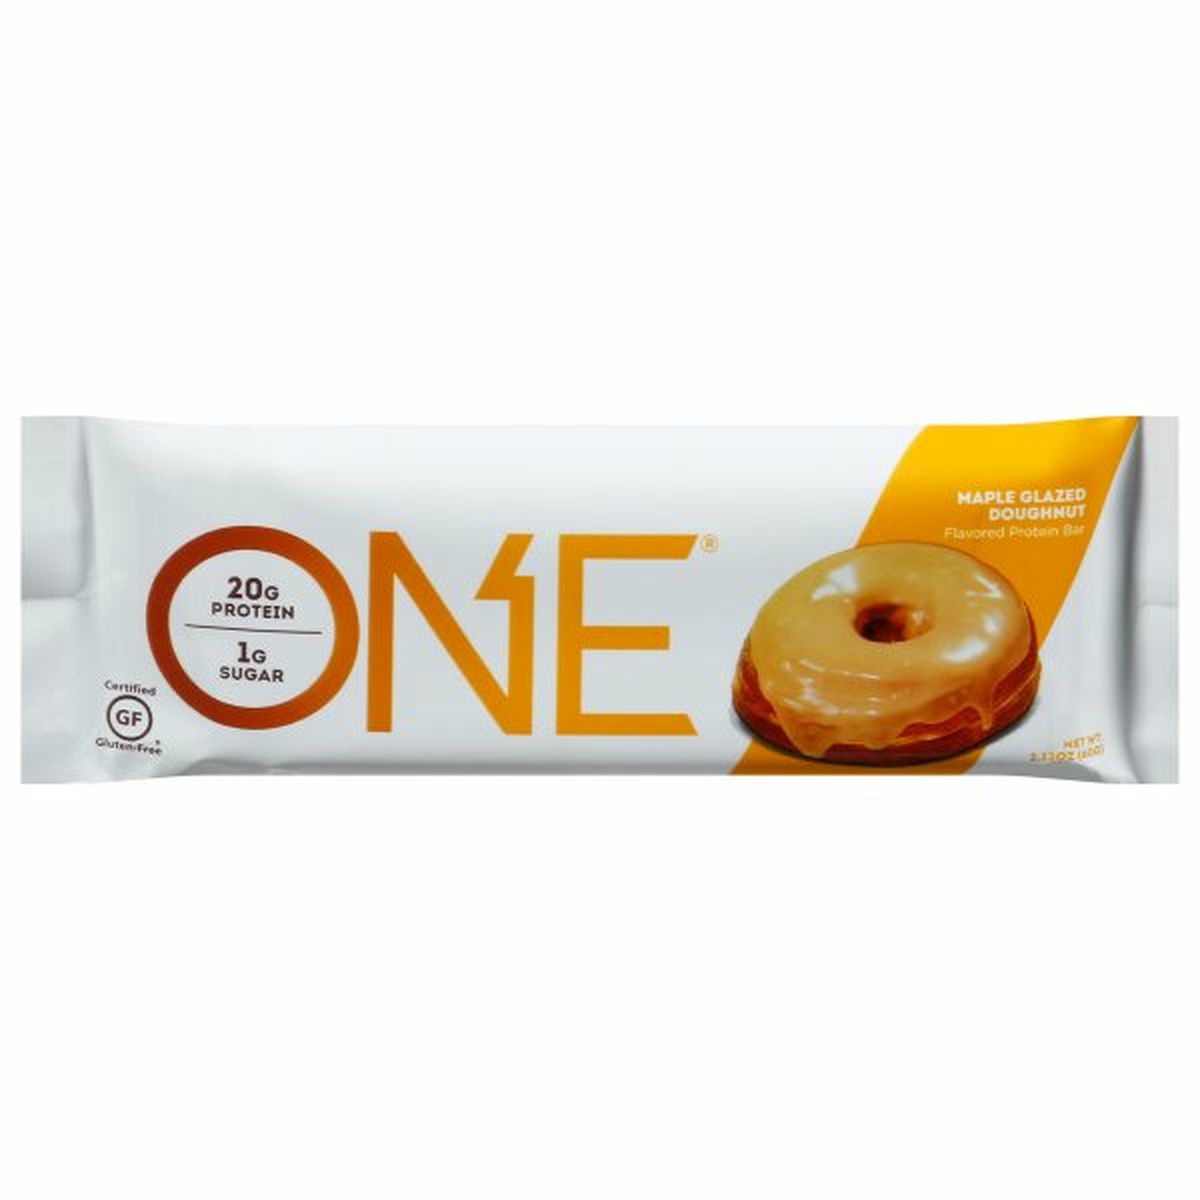 Calories in One Protein Bar, Maple Glazed Doughnut Flavored